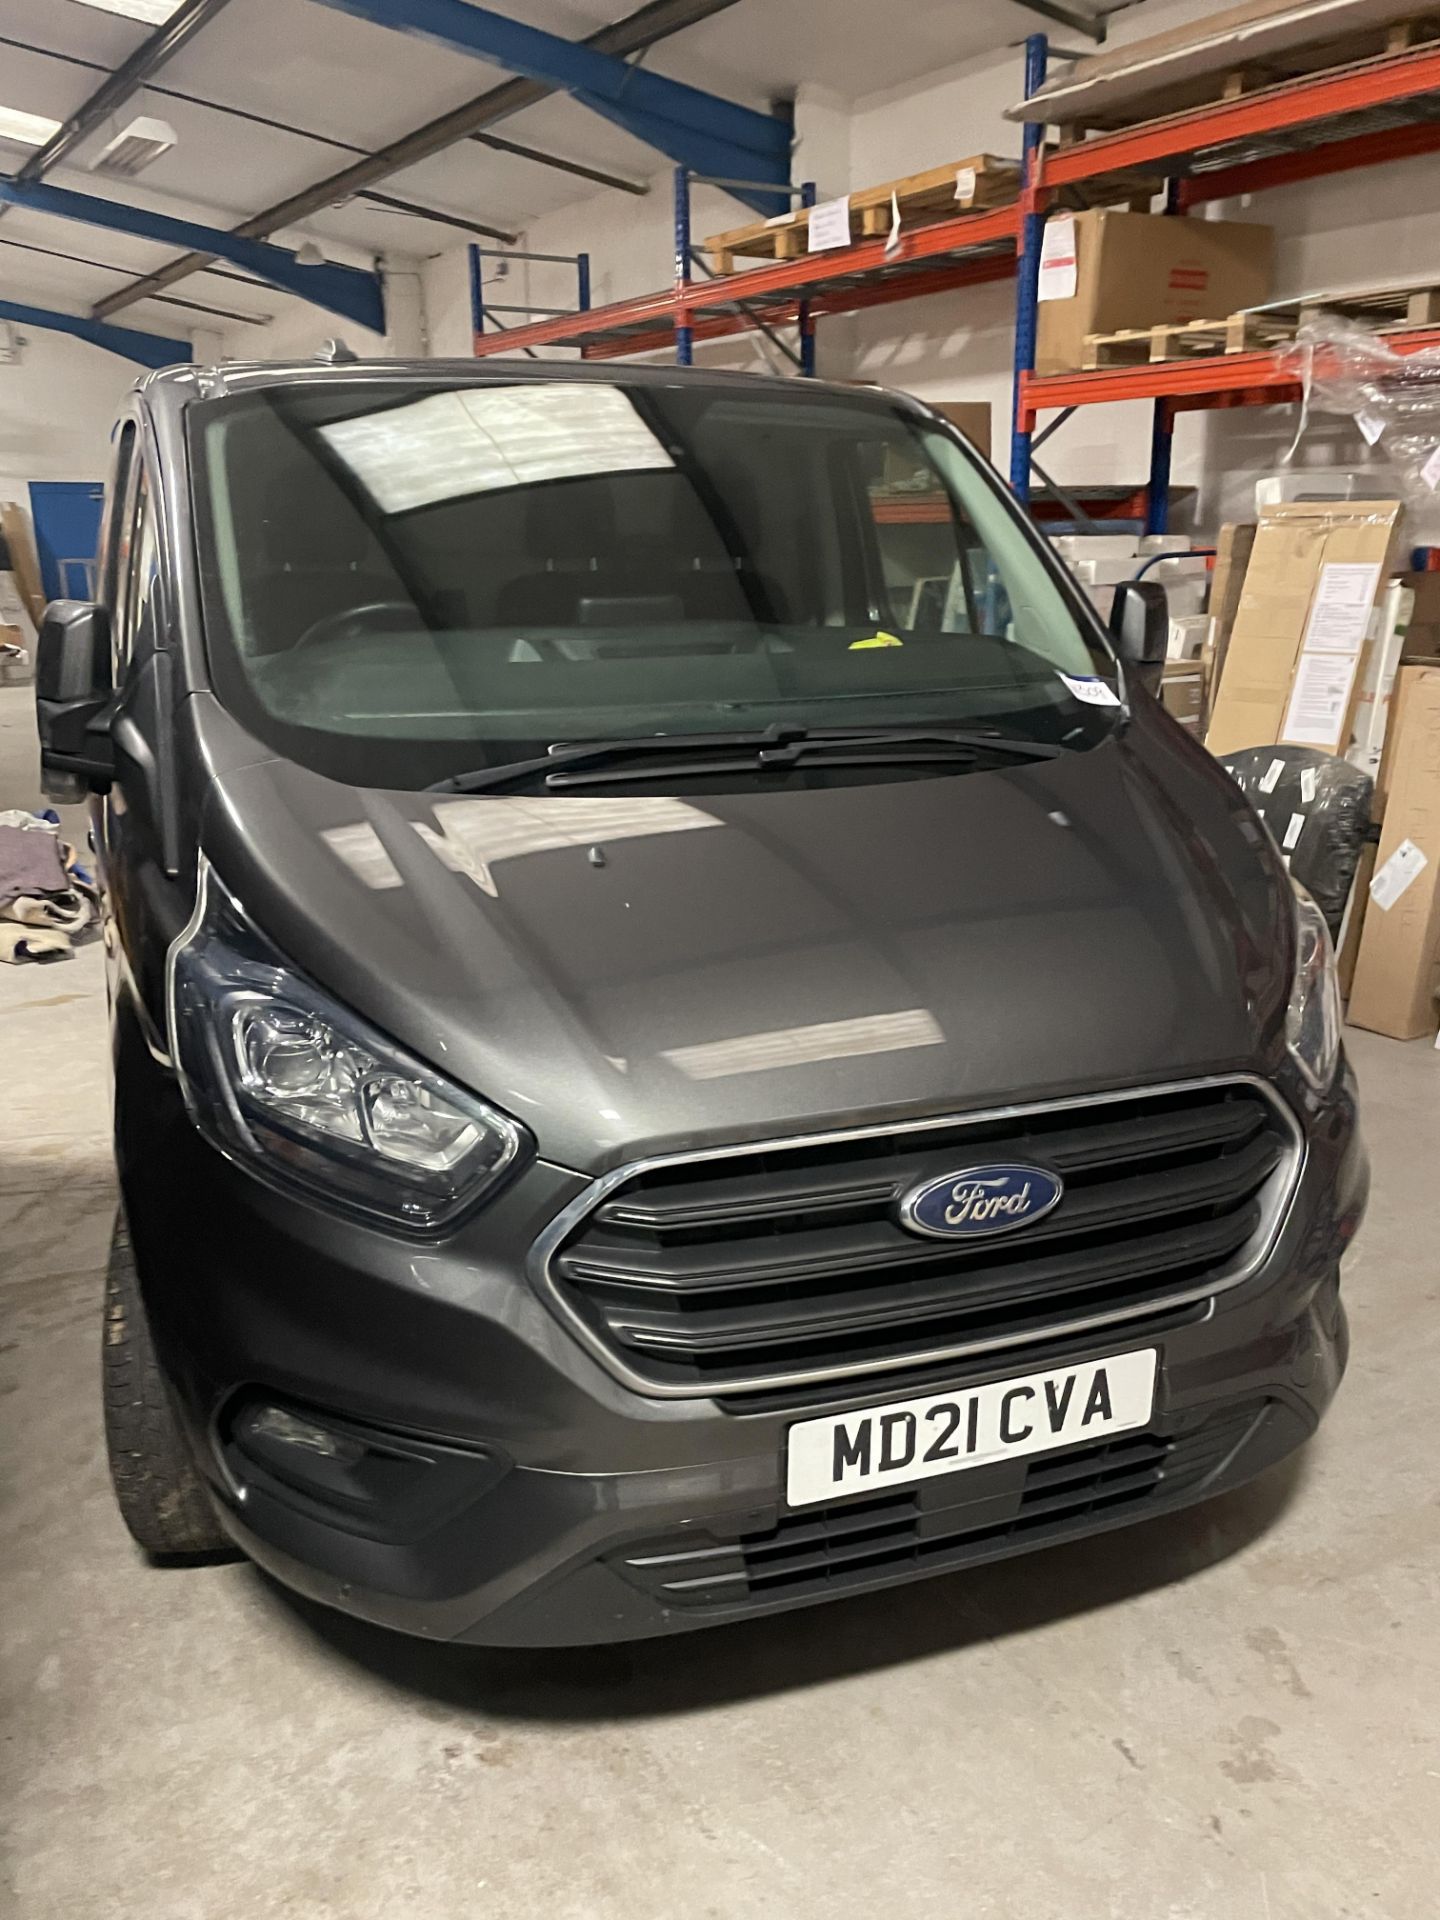 Ford Transit Custom 280 Limited EcoBlue Limited FWD LOW ROOF DIESEL PANEL VAN, registration no. MD21 - Image 2 of 8